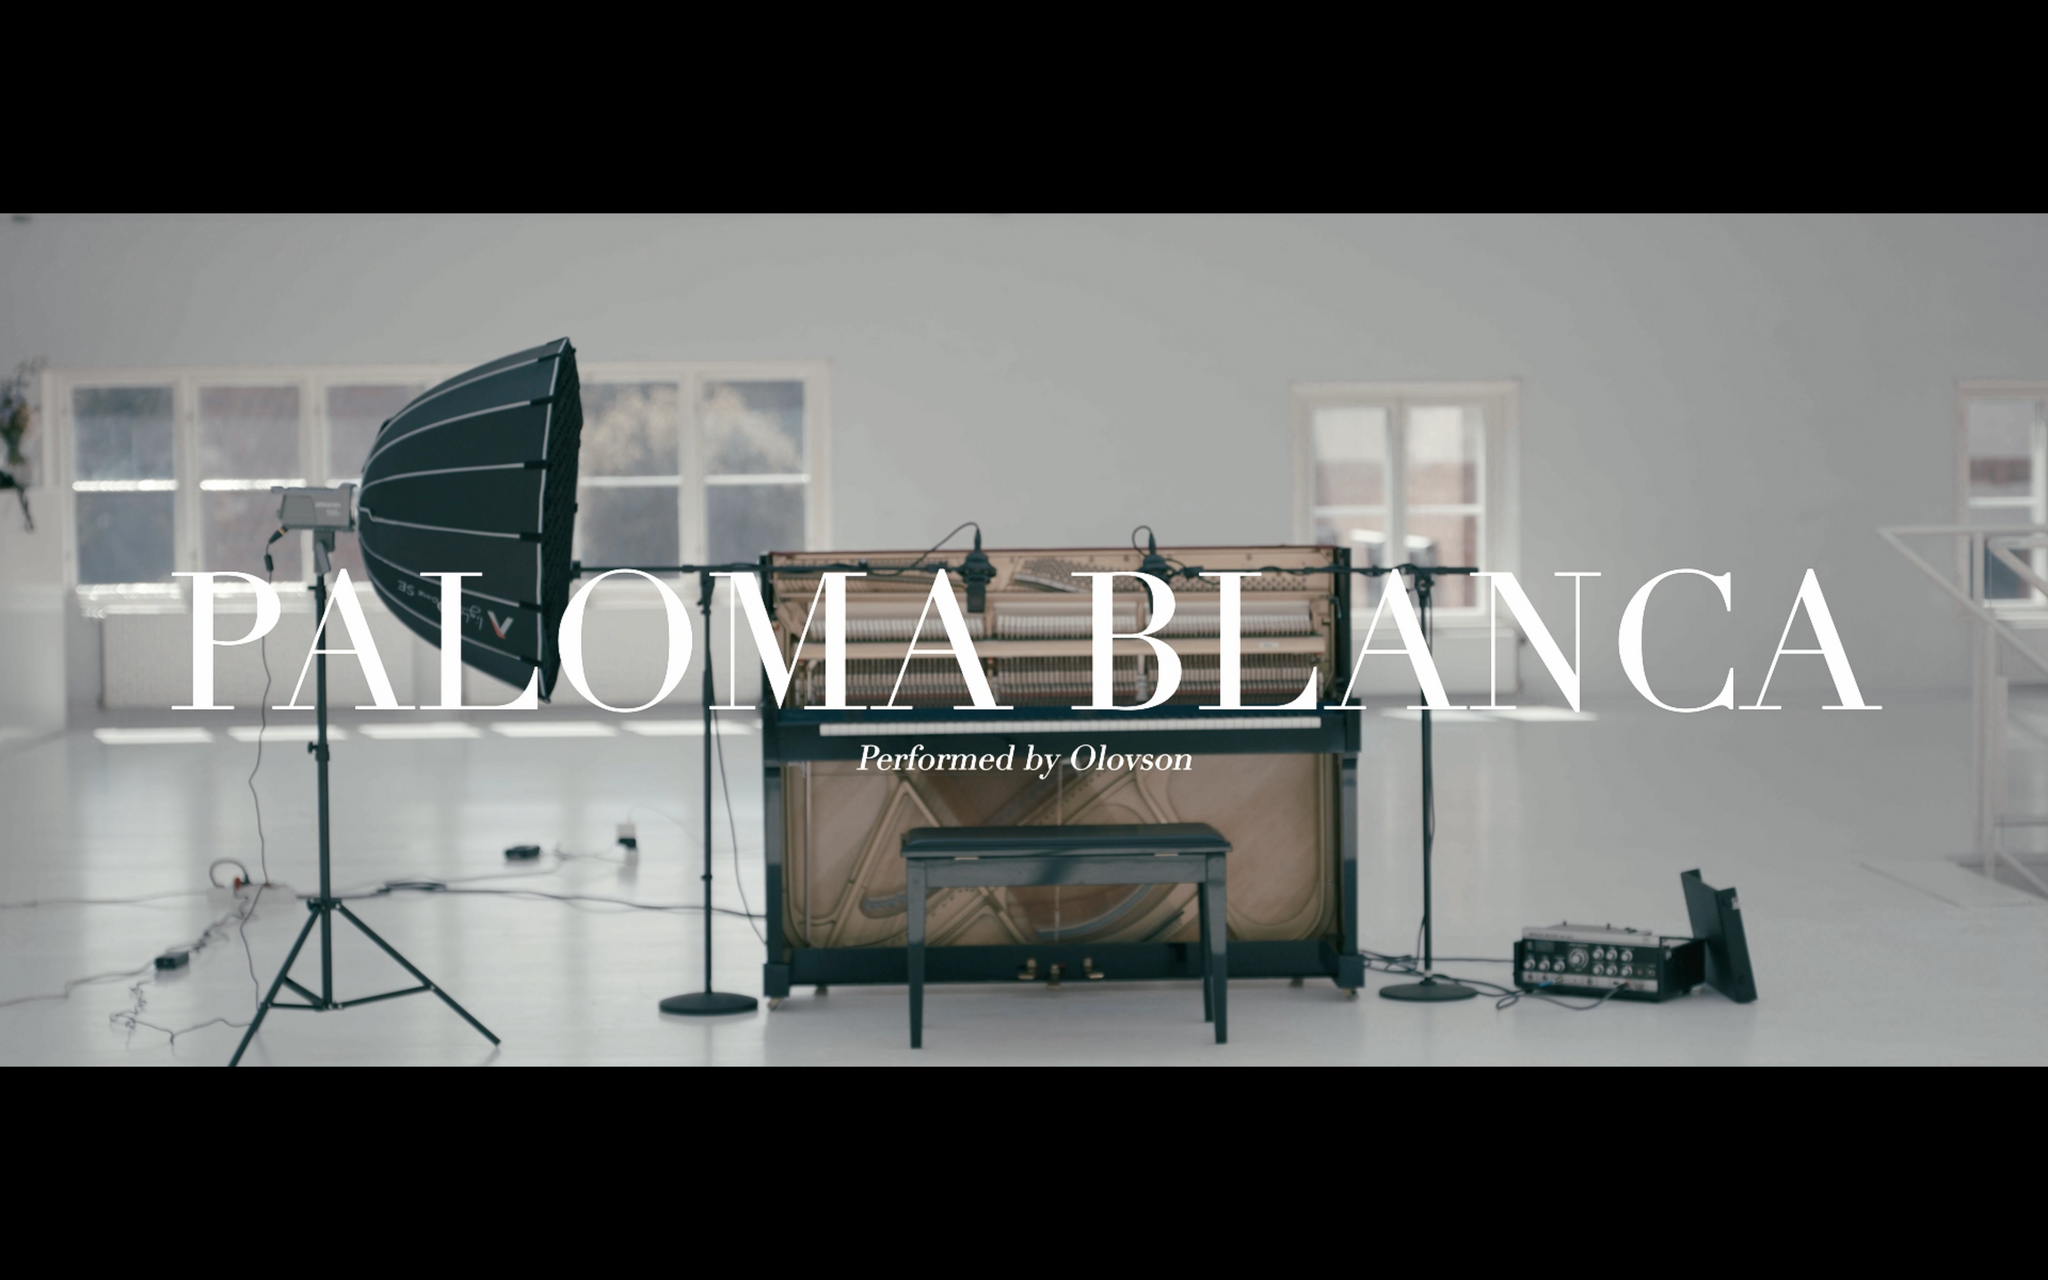 paloma blanca performed live on piano by olovson at färgfabriken in stockholm sweden